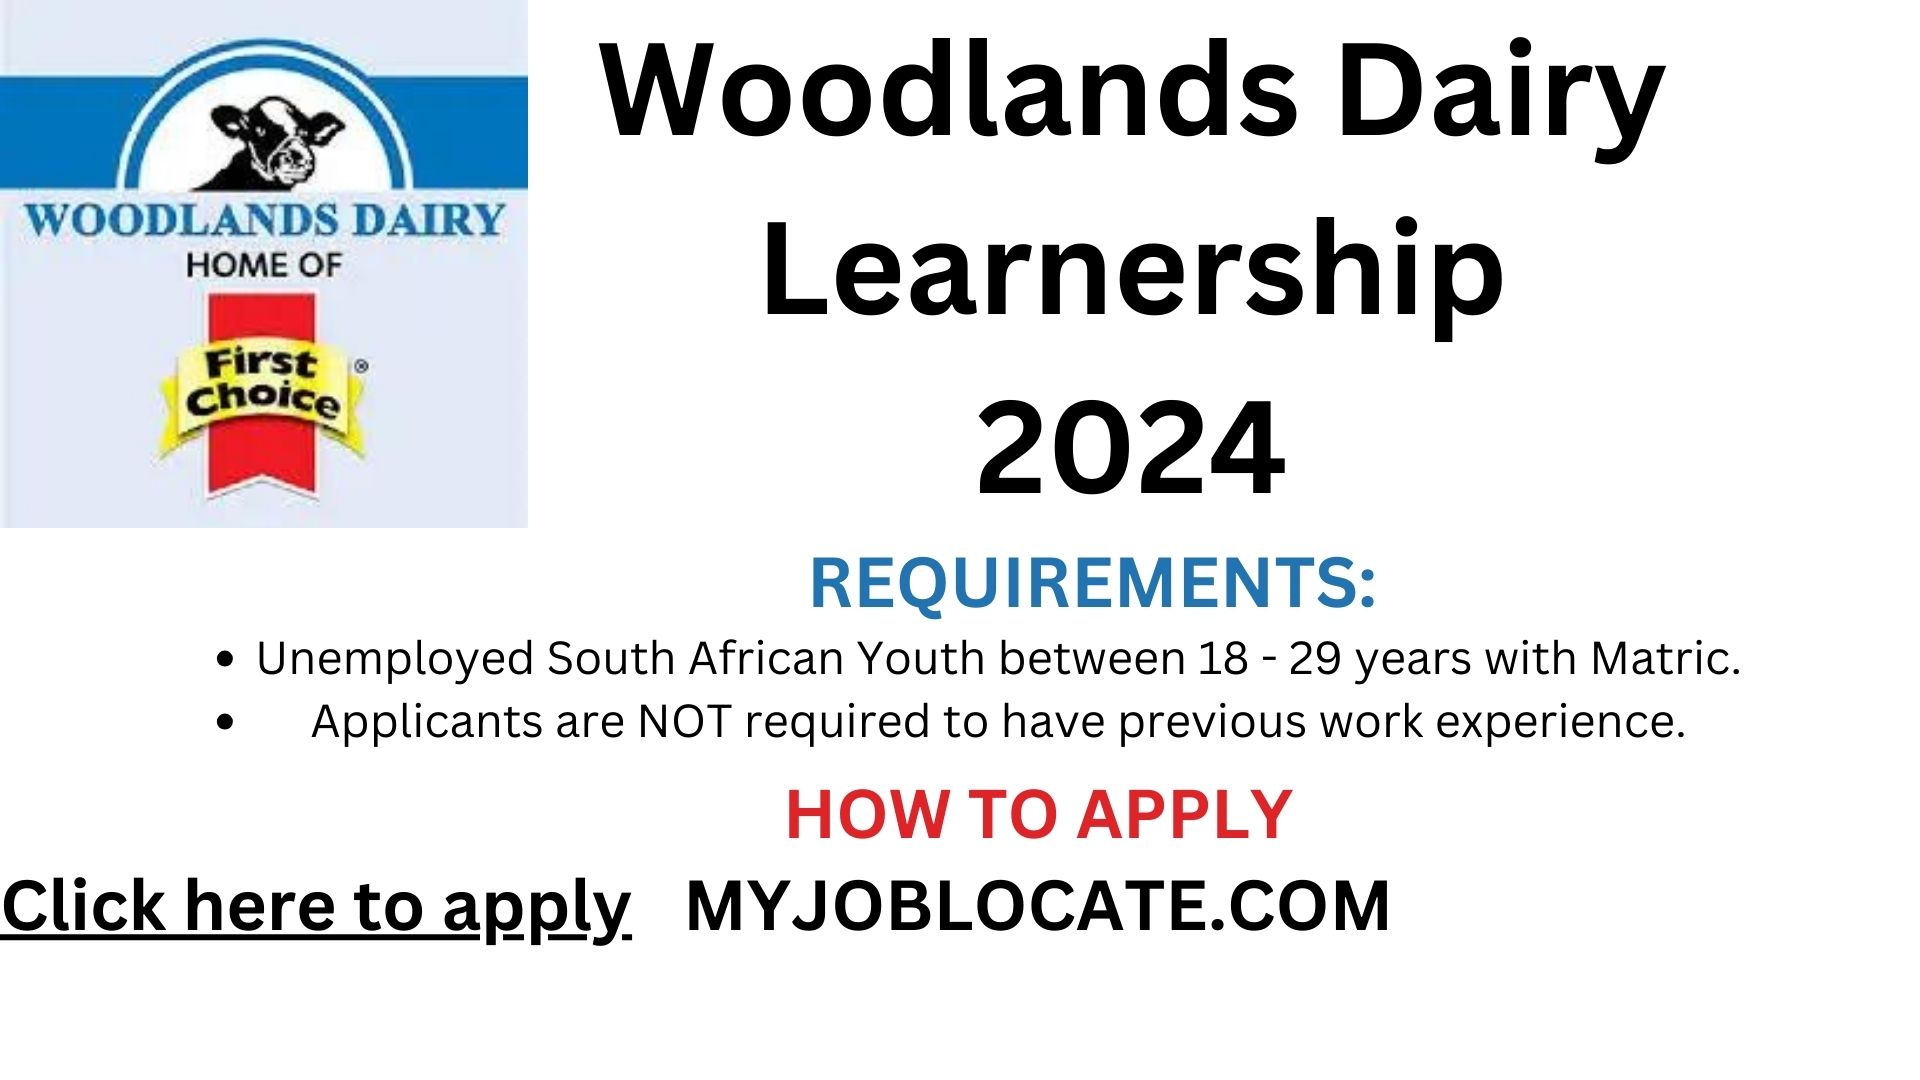 Woodlands Dairy Learnership 2024